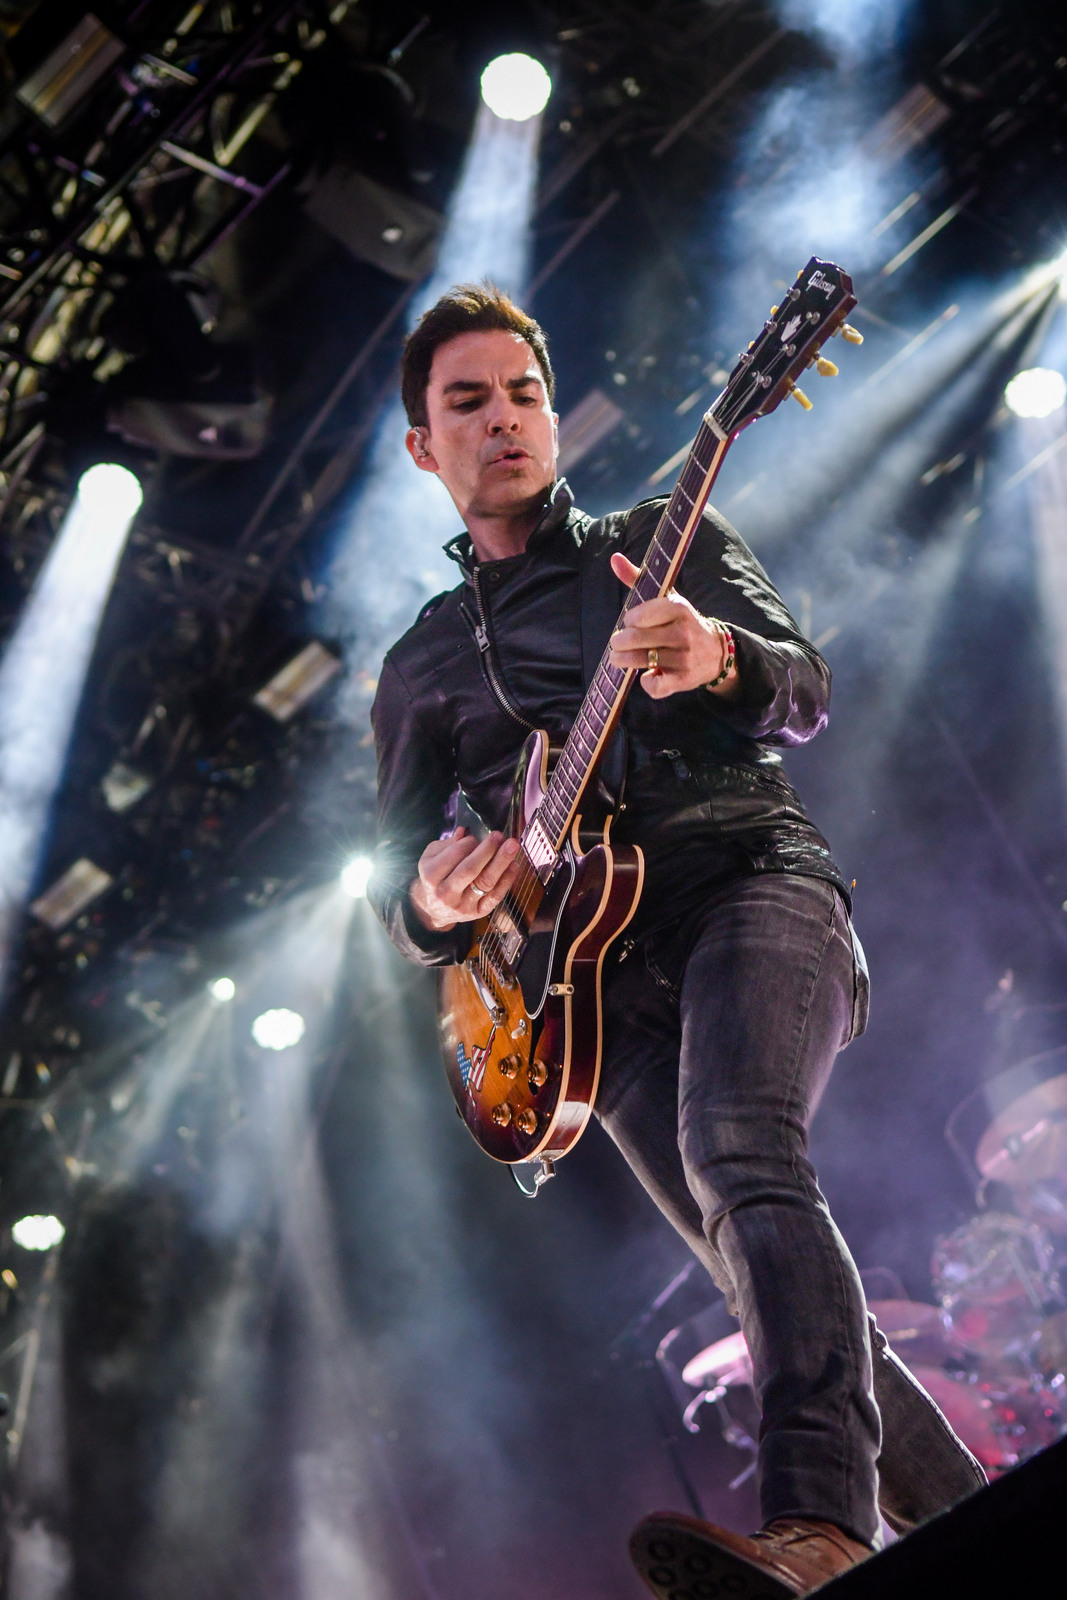 IN FOCUS// Stereophonics at Custom House Square, Wednesday 24th August 2022